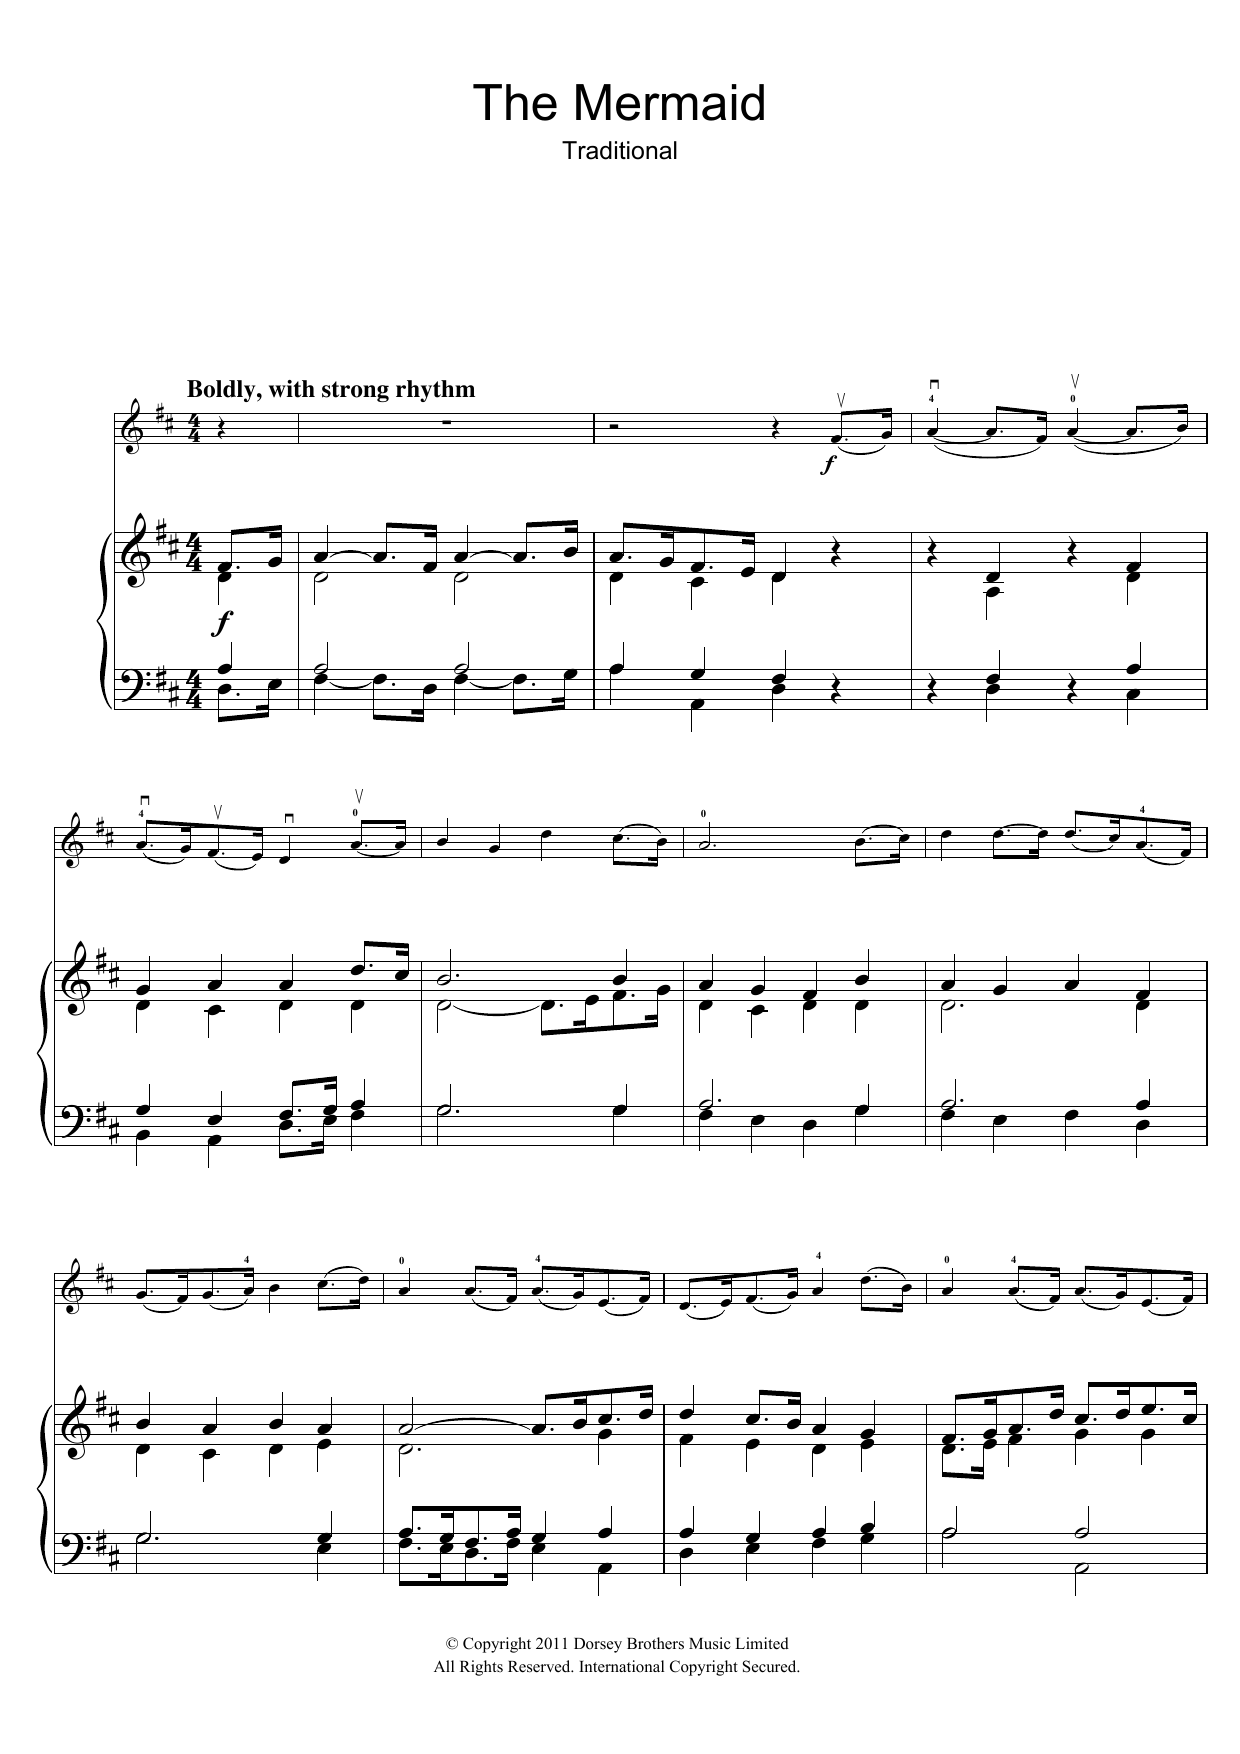 Download Traditional The Mermaid Sheet Music